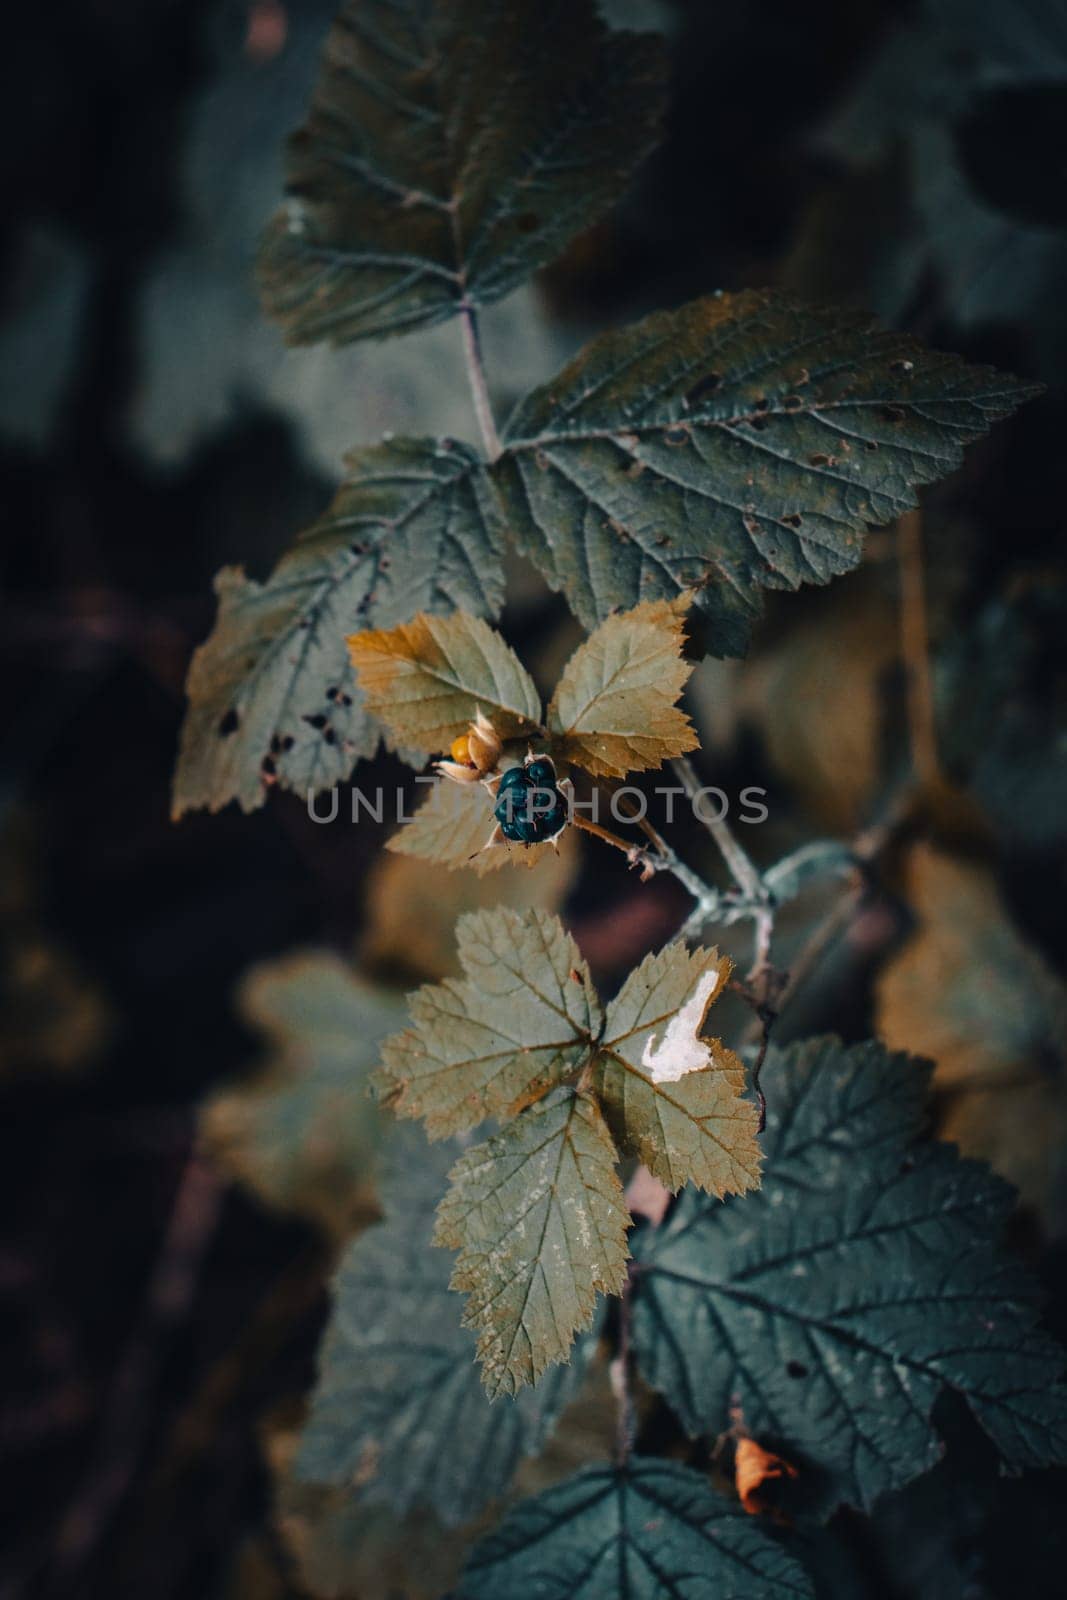 Close up blackberry branch autumn bush concept photo. Outdoors in rural morning. Front view photography with blurred background. High quality picture for wallpaper